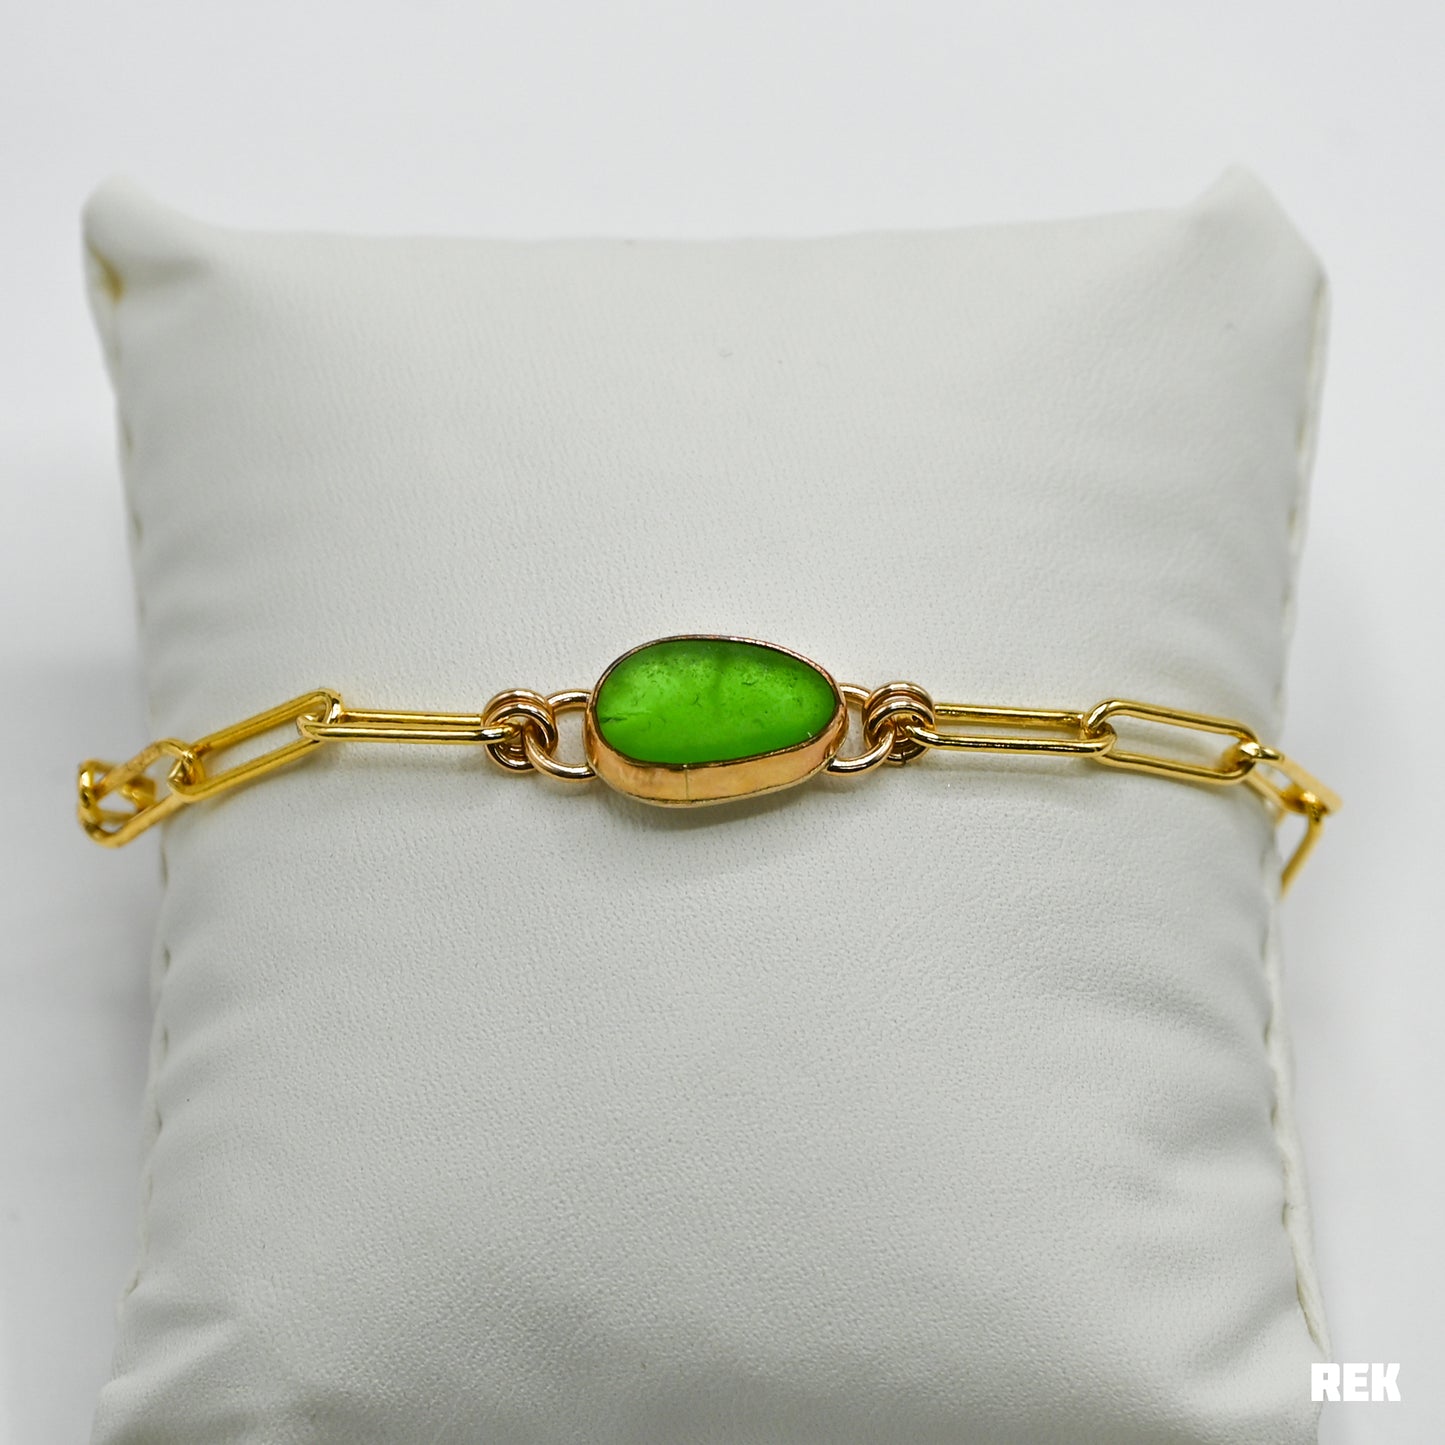 Gold fill green sea glass and paperclip chain bracelet